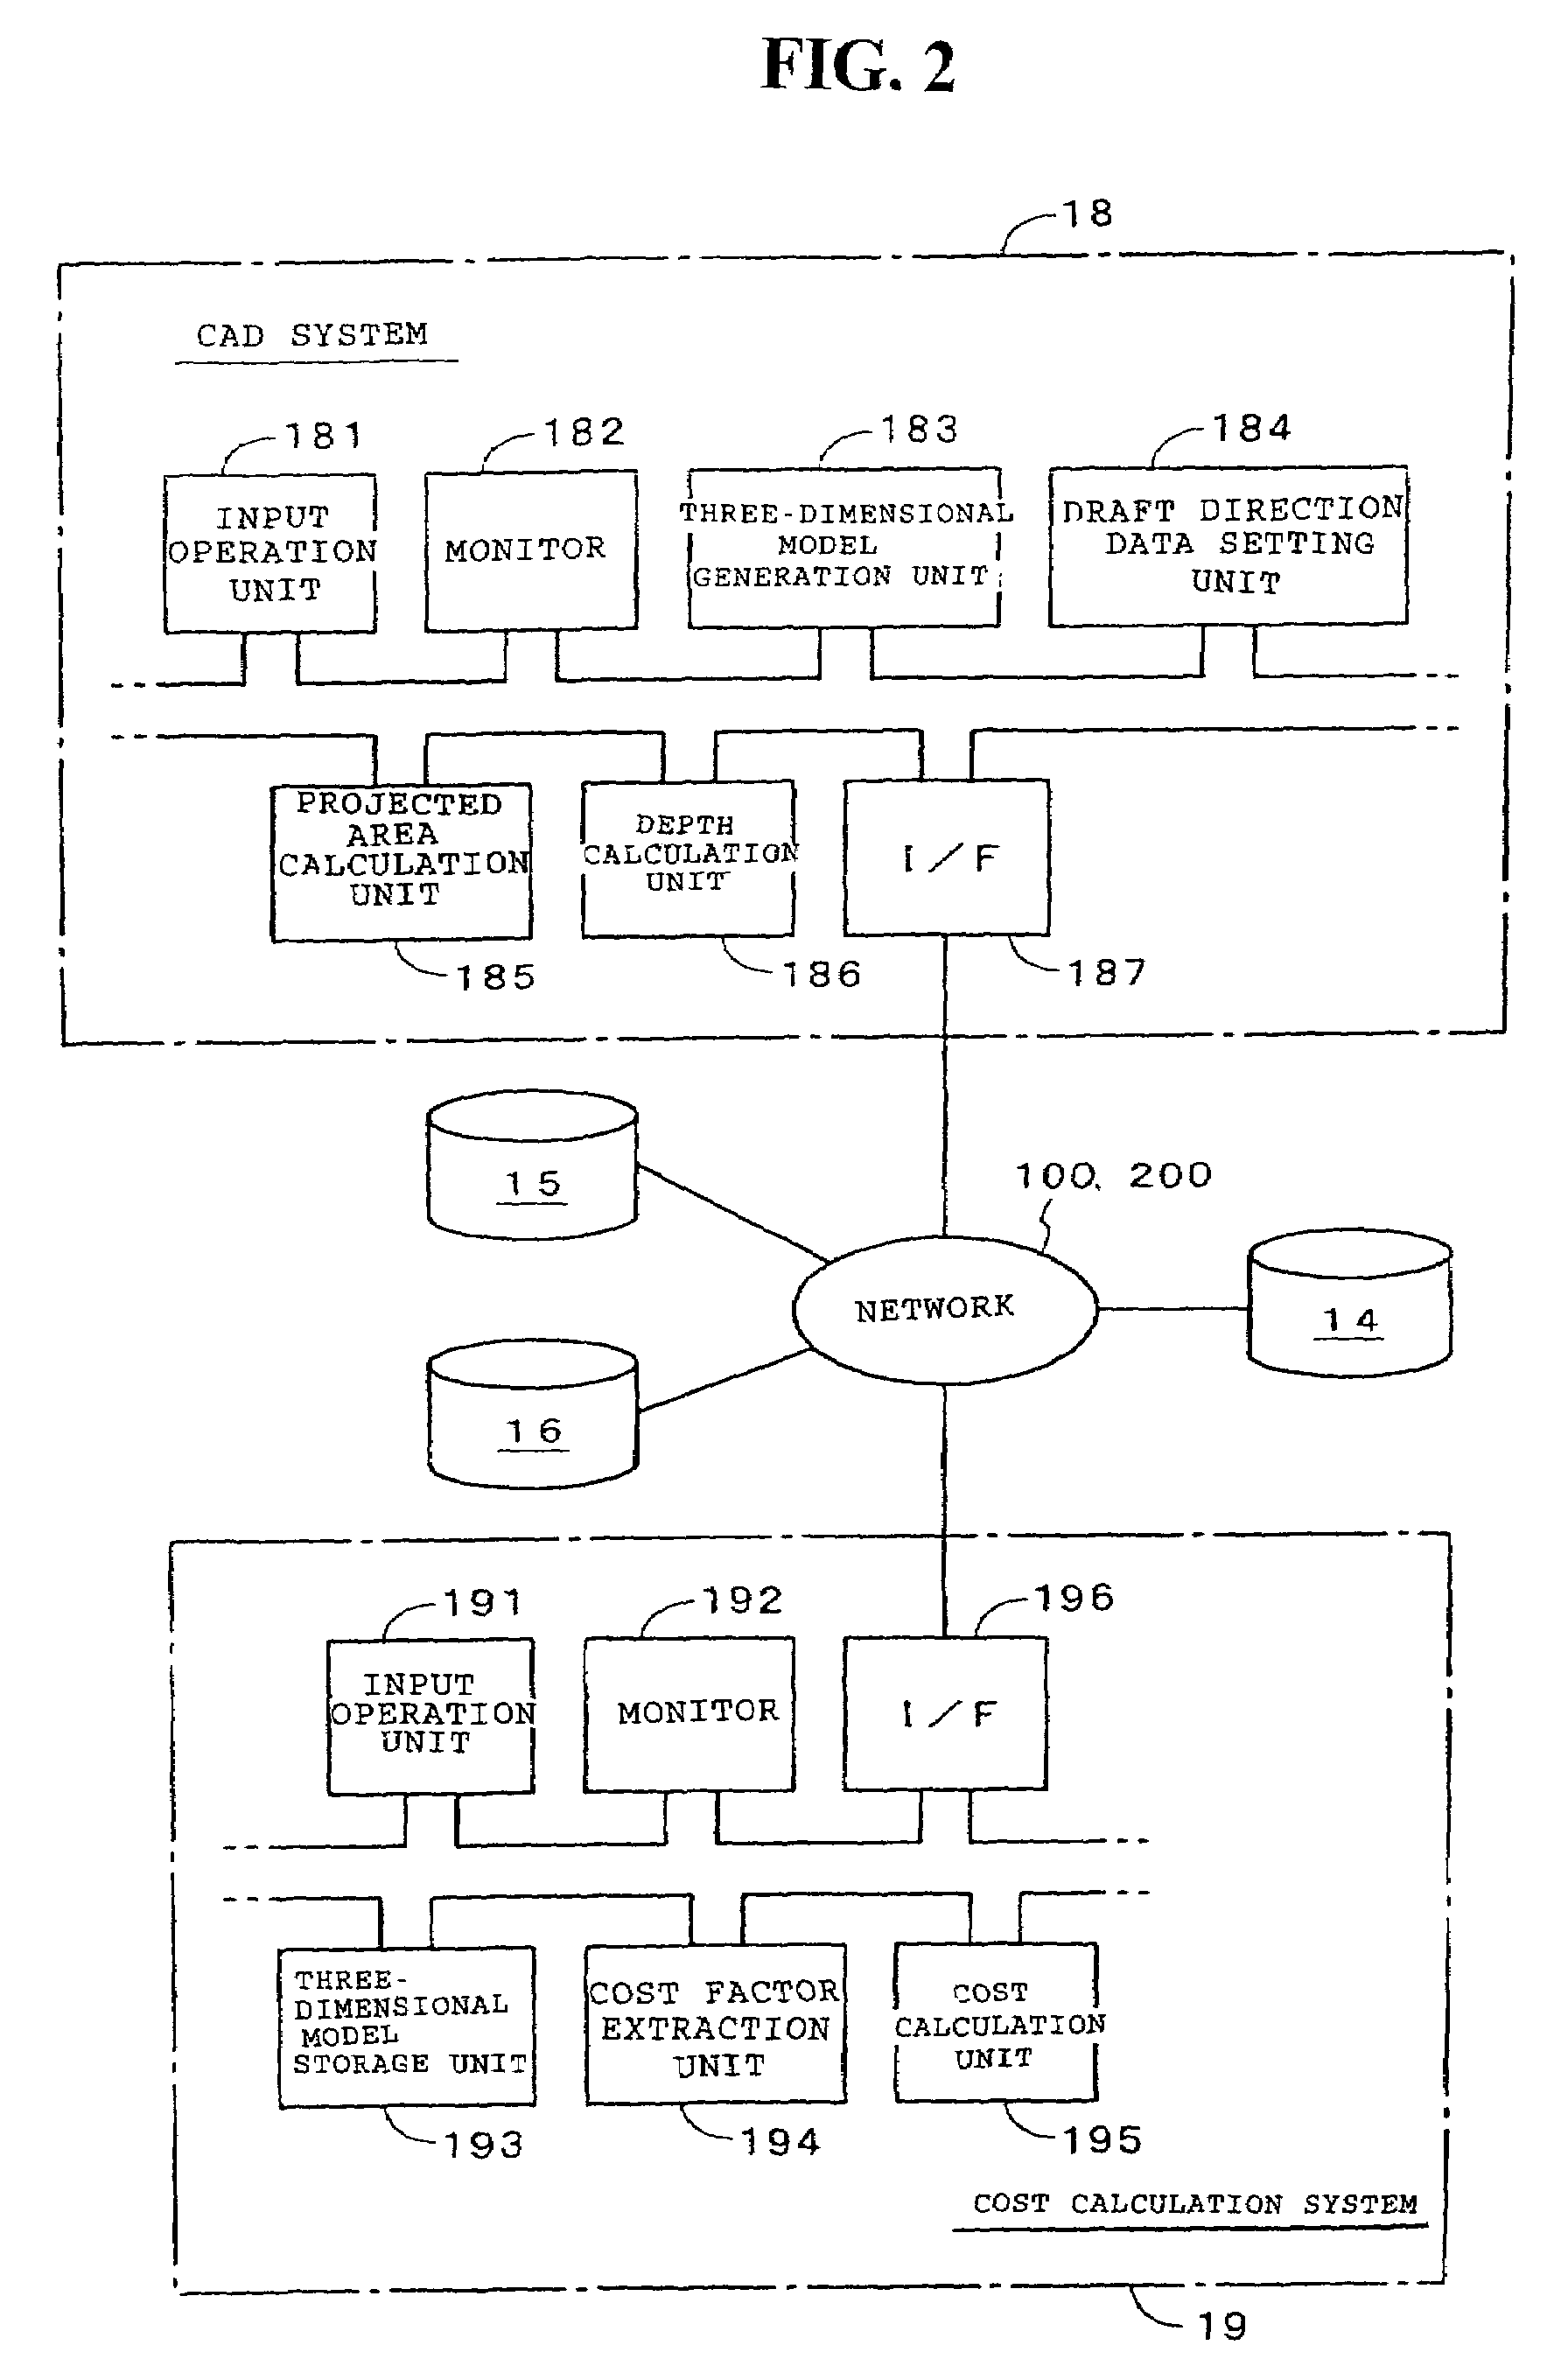 Three-dimensional CAD system and part cost calculation system